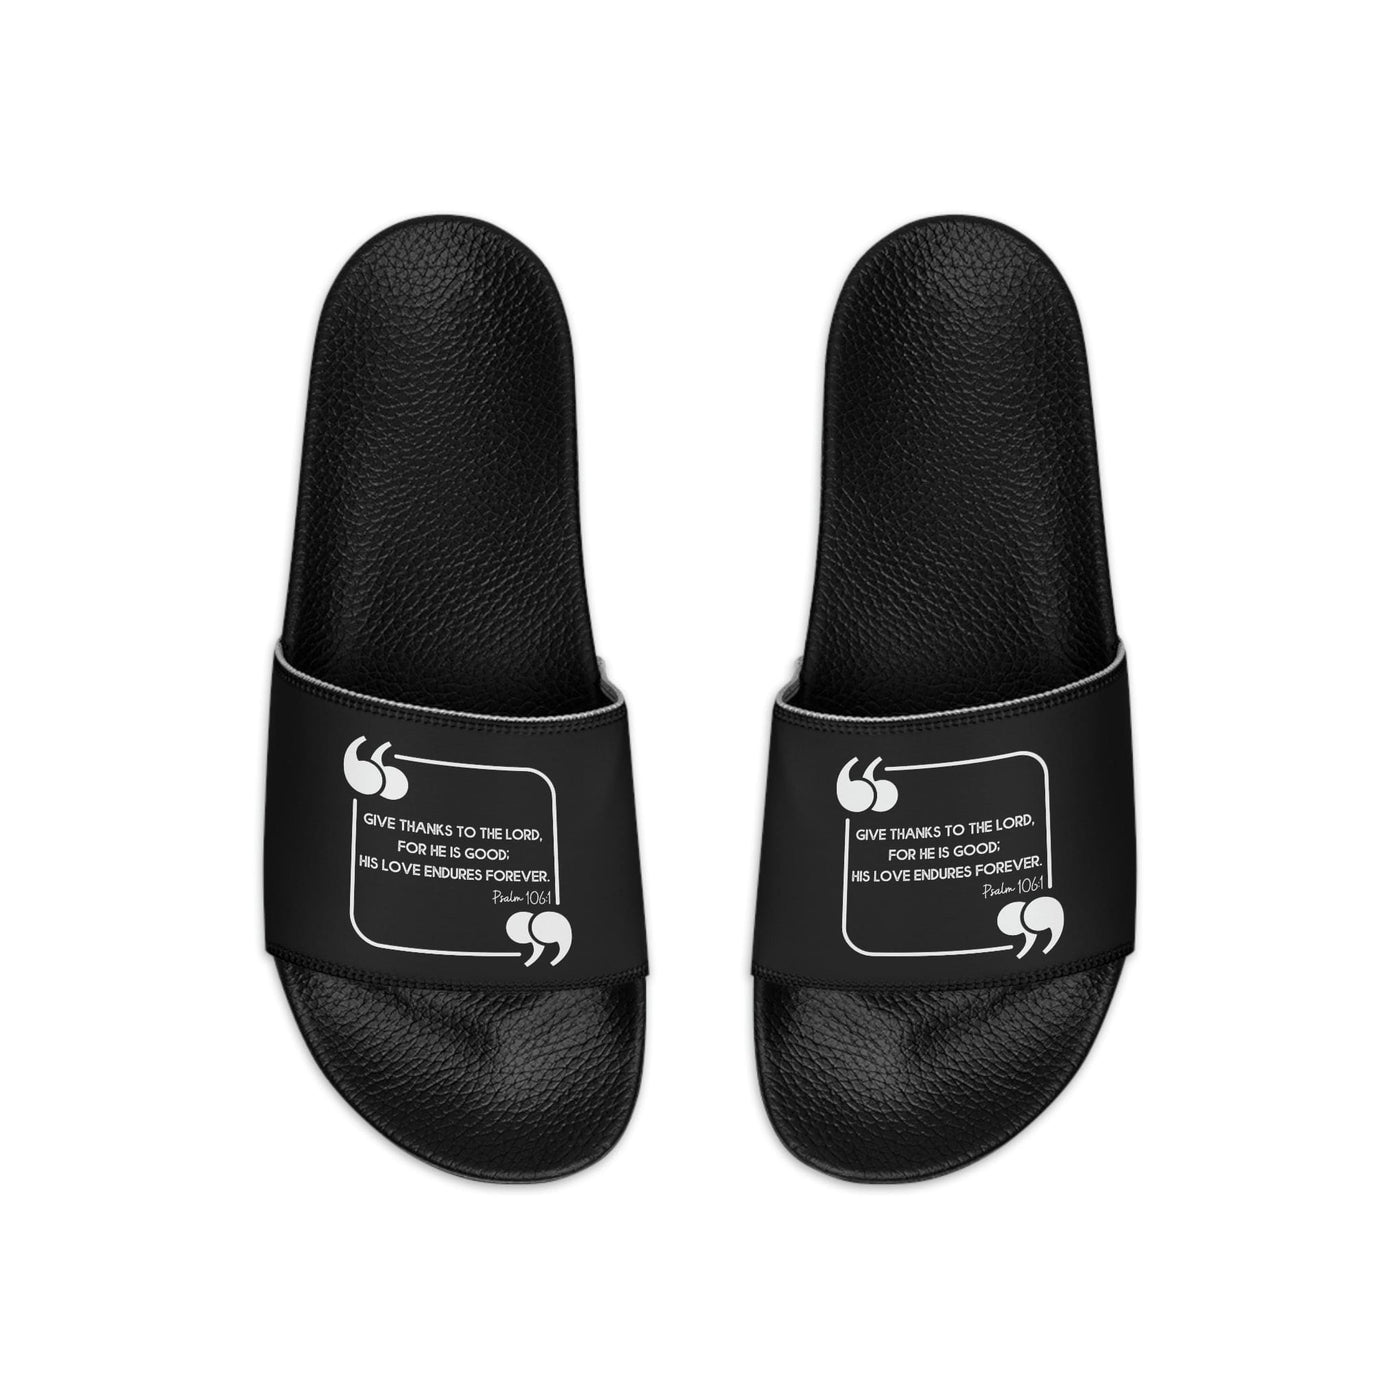 Mens Black Slide Sandals Give Thanks To The Lord Christian Inspiration - Mens